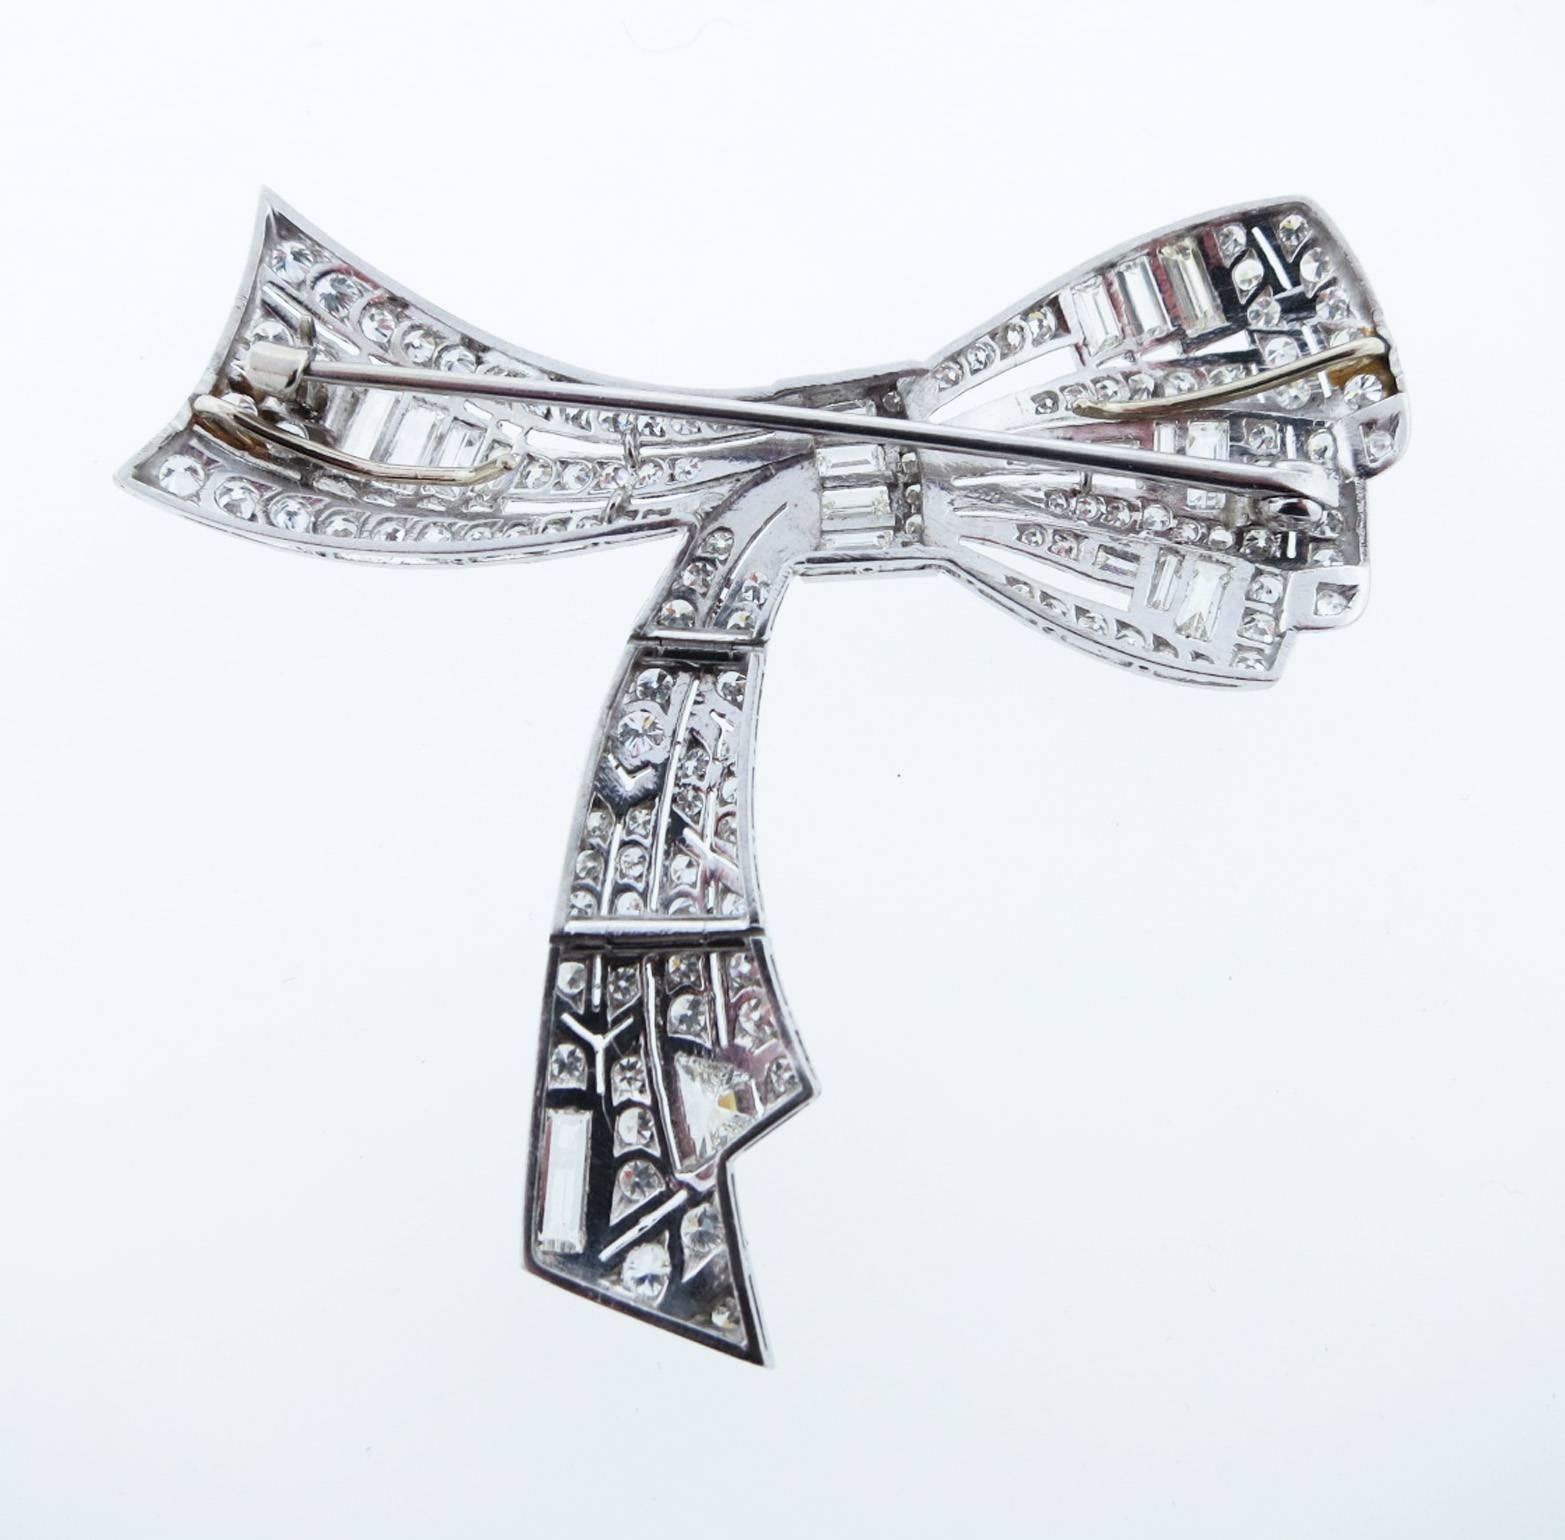 Exquisite articulated platinum bow brooch with loops on the back to accommodate a chain attachment . The bow is bead set in a finely mill- grained mount with 17 baguette cut diamonds, 89 round European cut diamonds and one kite cut . Total diamond